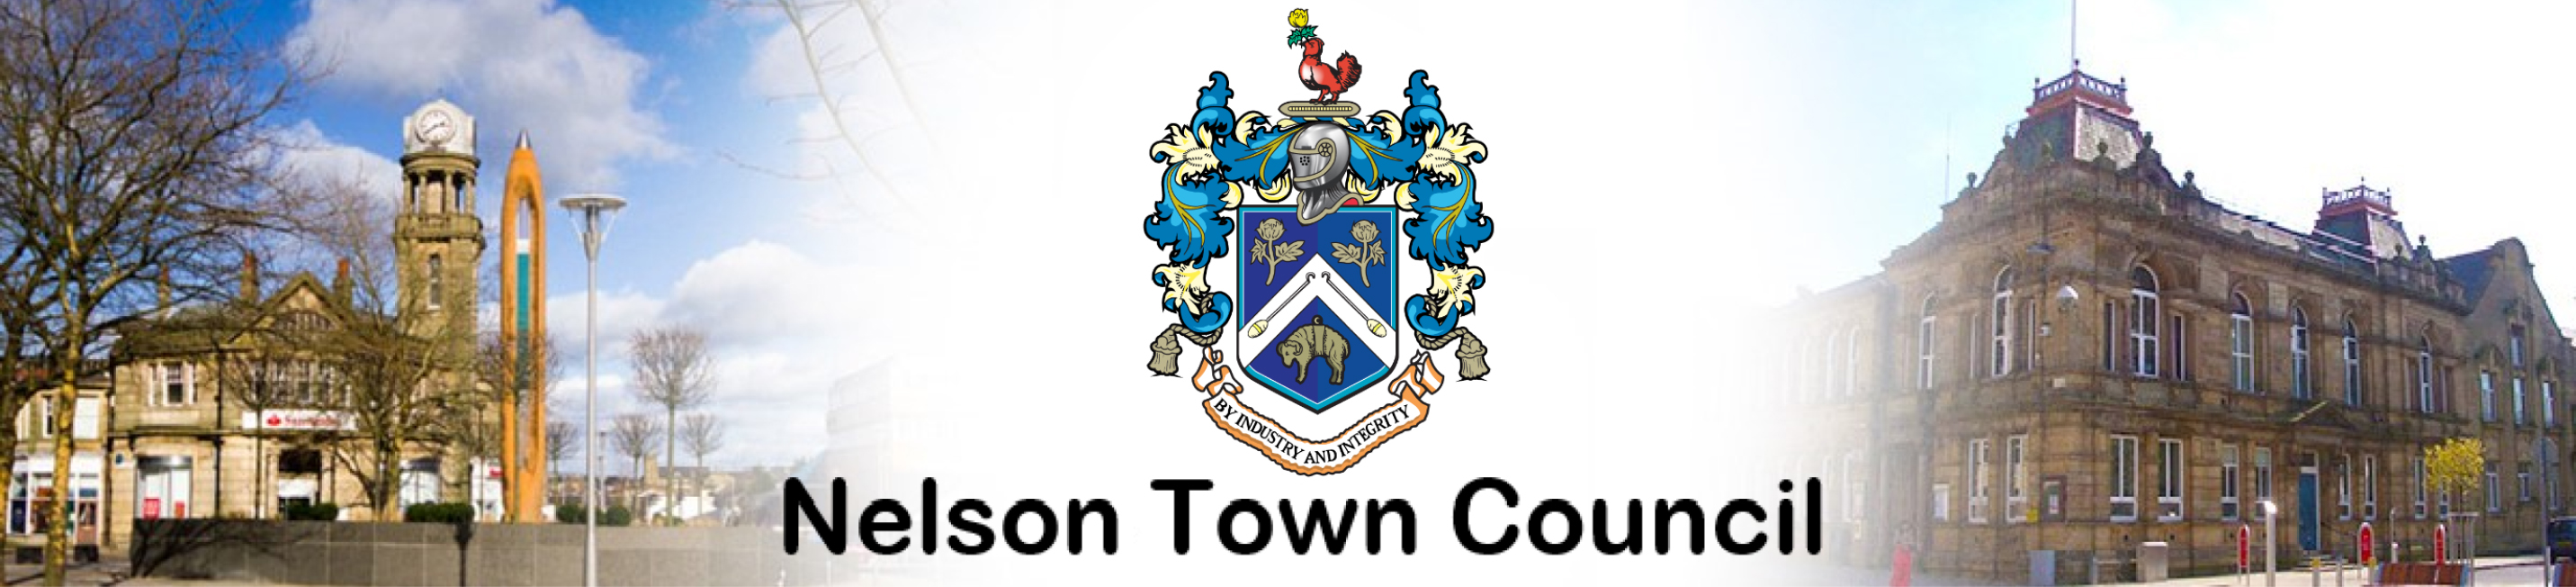 Header Image for Nelson Town Council